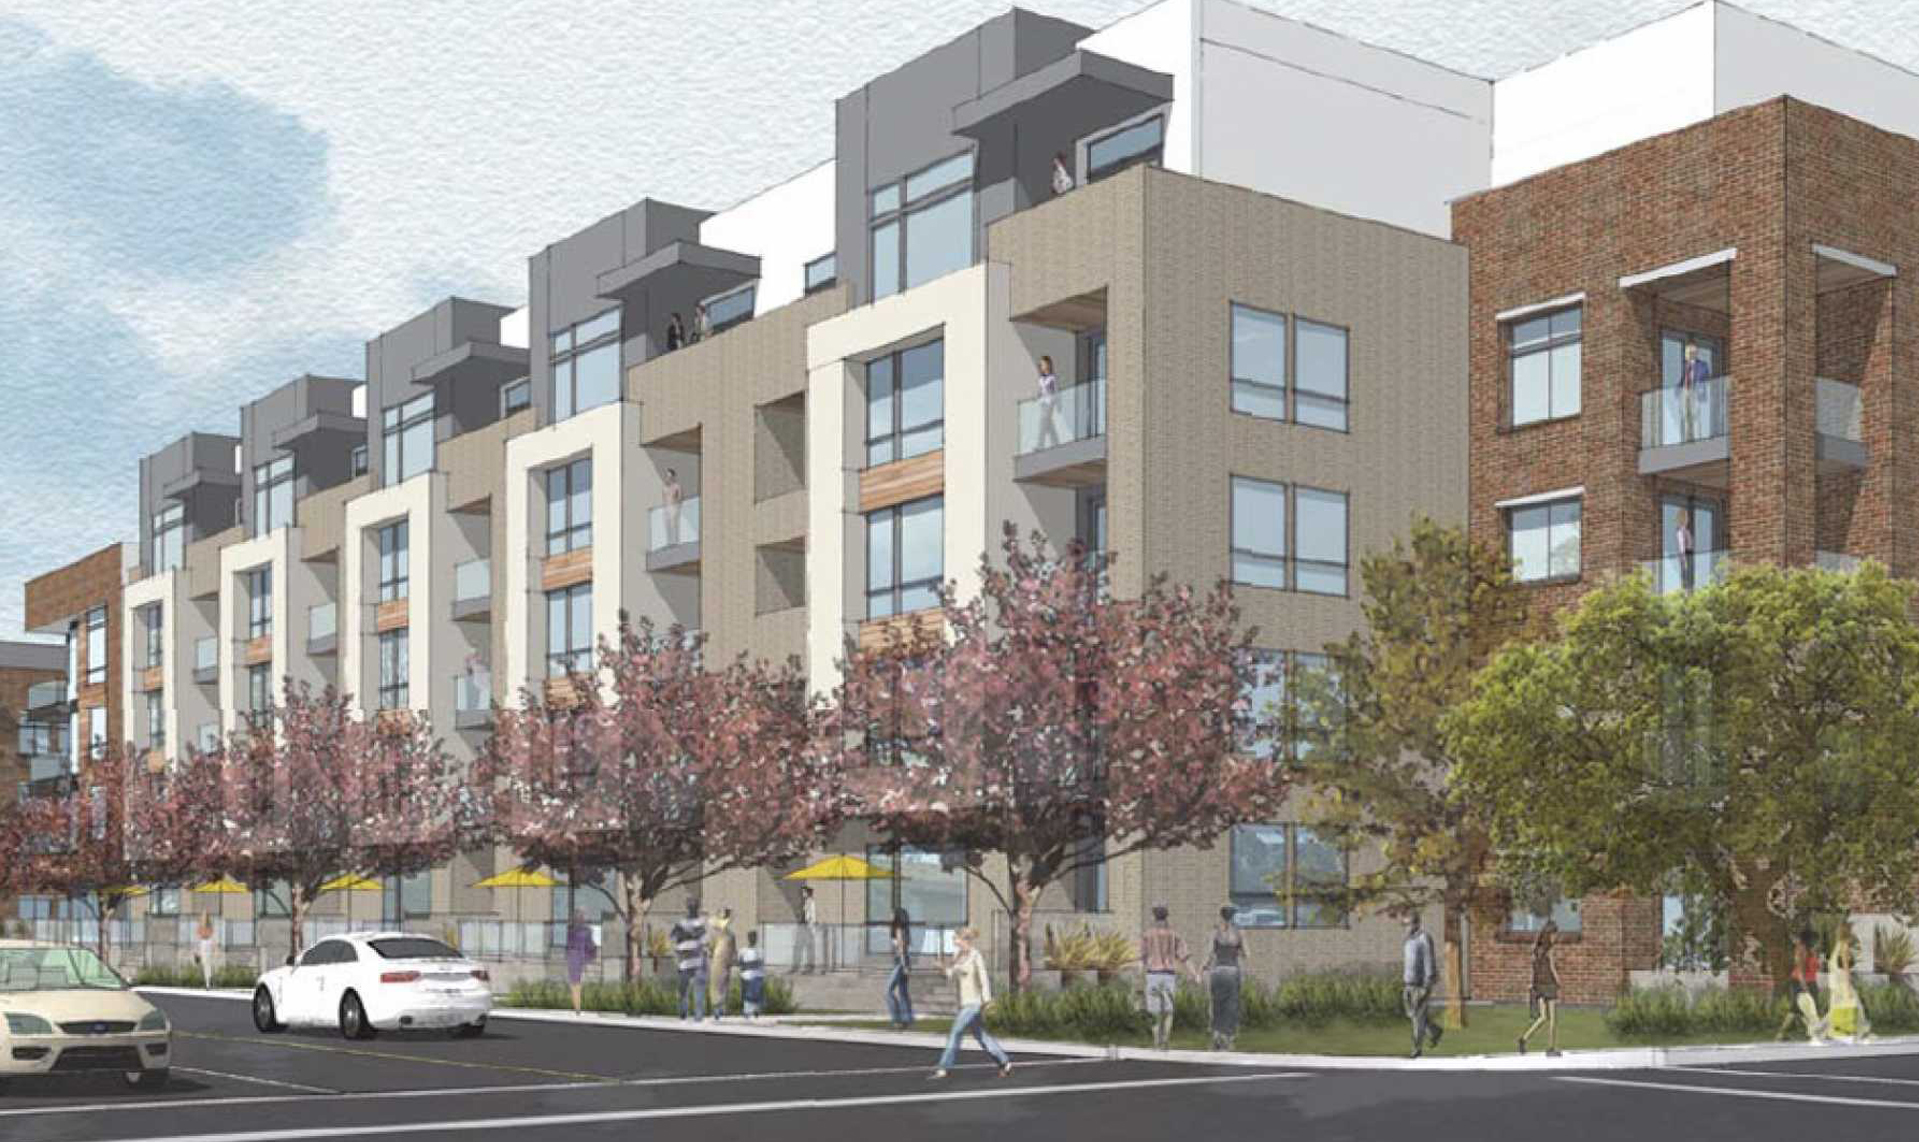 Plan for New Housing at The Alhambra Moves Forward